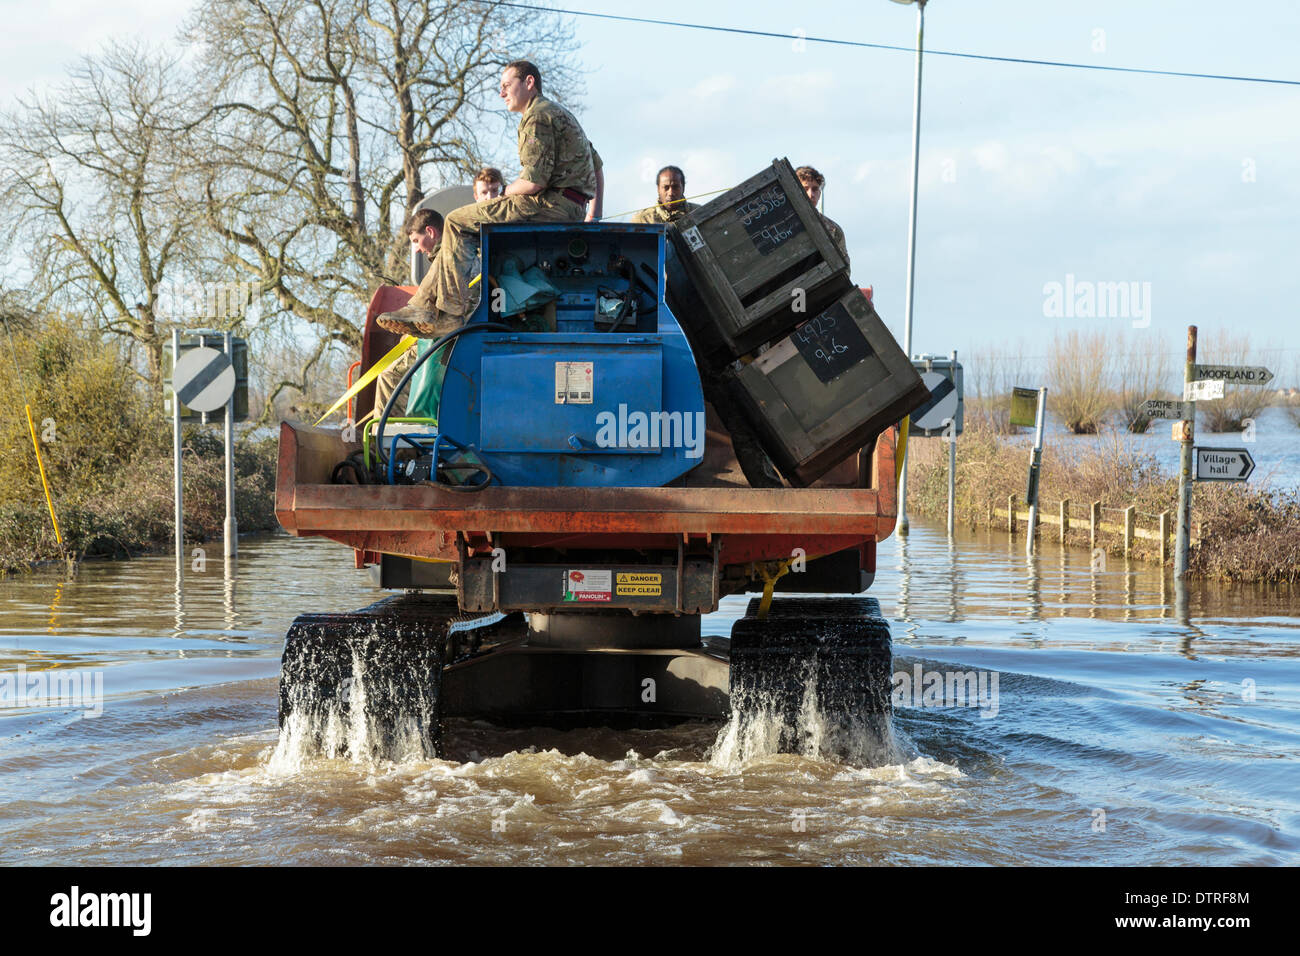 Burrowbridge, UK. 22nd Feb, 2014. Commandos helping at Burrowbridge on the flooded Somerset Levels on February 22, 2014. A group of soldiers are transported through the floodwater by workers of the Environment Agency in a Trac-dumper, a specialised vehicle capable of going through deep water. Supplies of oil and mechanical parts are sent to Saltmoor Pumping Station where water from Northmoor is being pumped into the tidal River Parrett to provide relief to the flooded area. These are the worst floods on the Somerset Levels in living history. Stock Photo